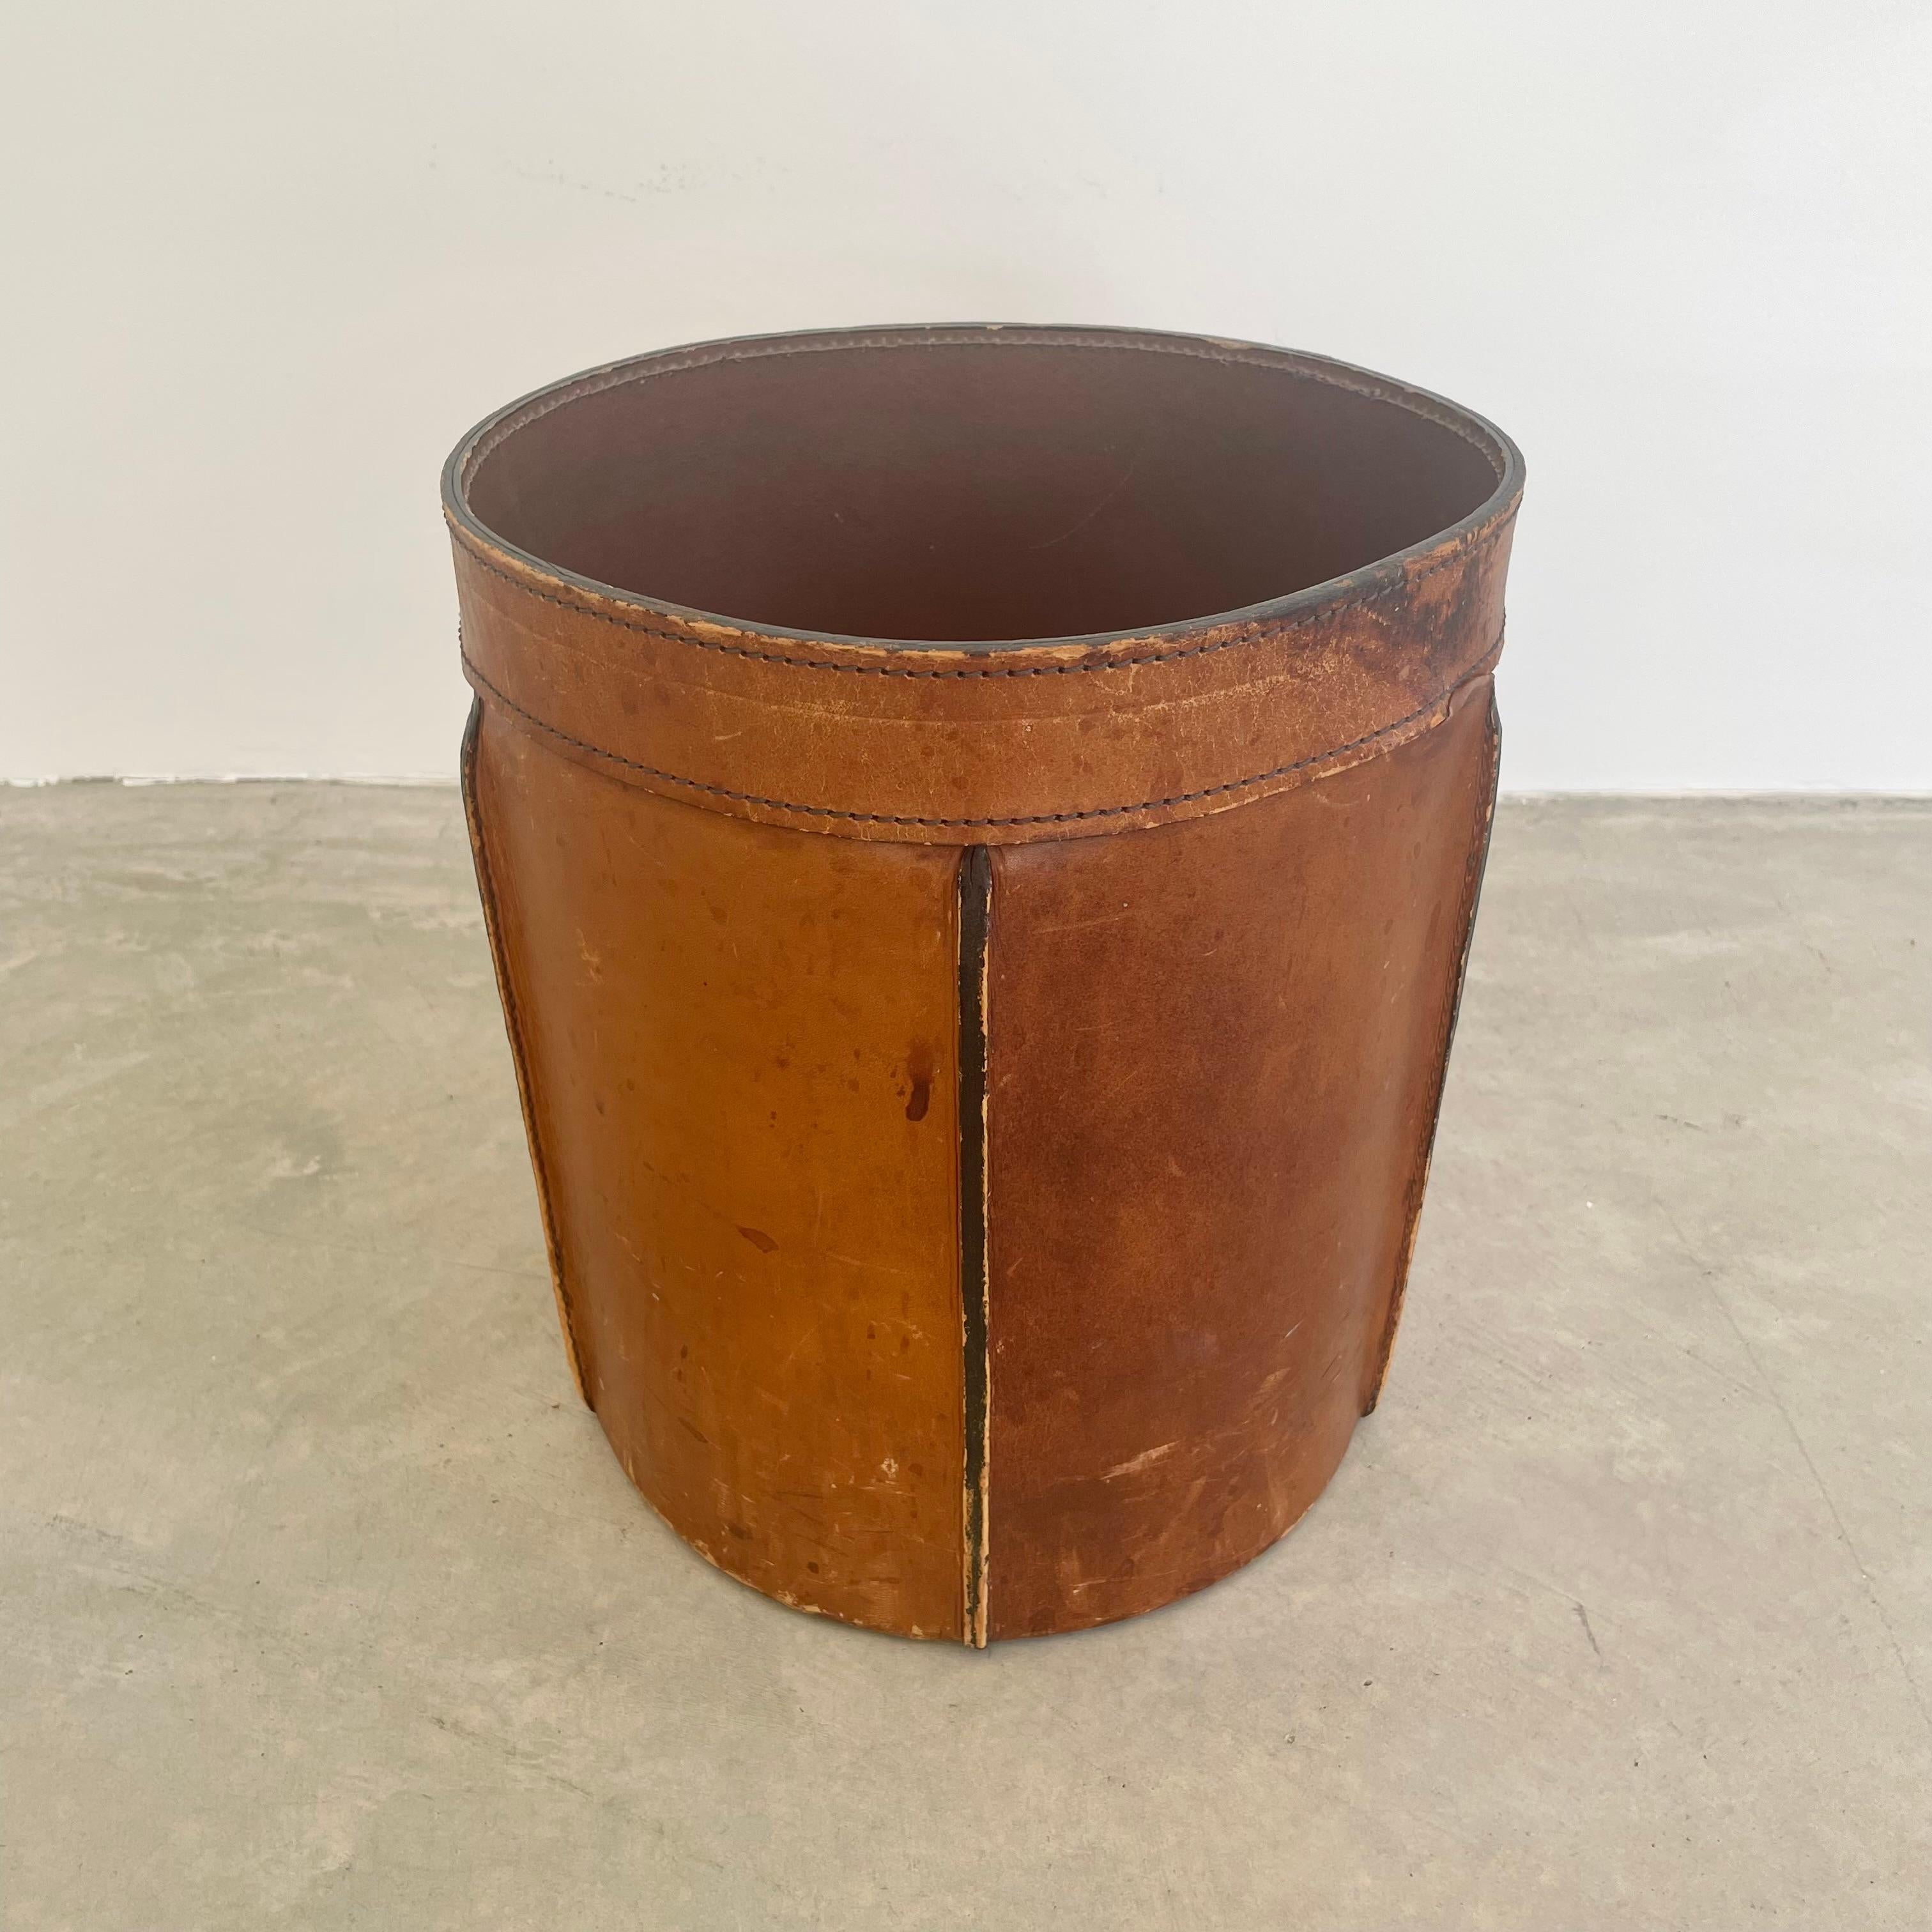 Gorgeous 1960s waste bin with ridged seams made out of brown cowhide leather. Thick stitching gives this piece a slight Adnet style thus elevating it's appearance. Beautiful scuffs and water marks give this piece a totally unique patina and